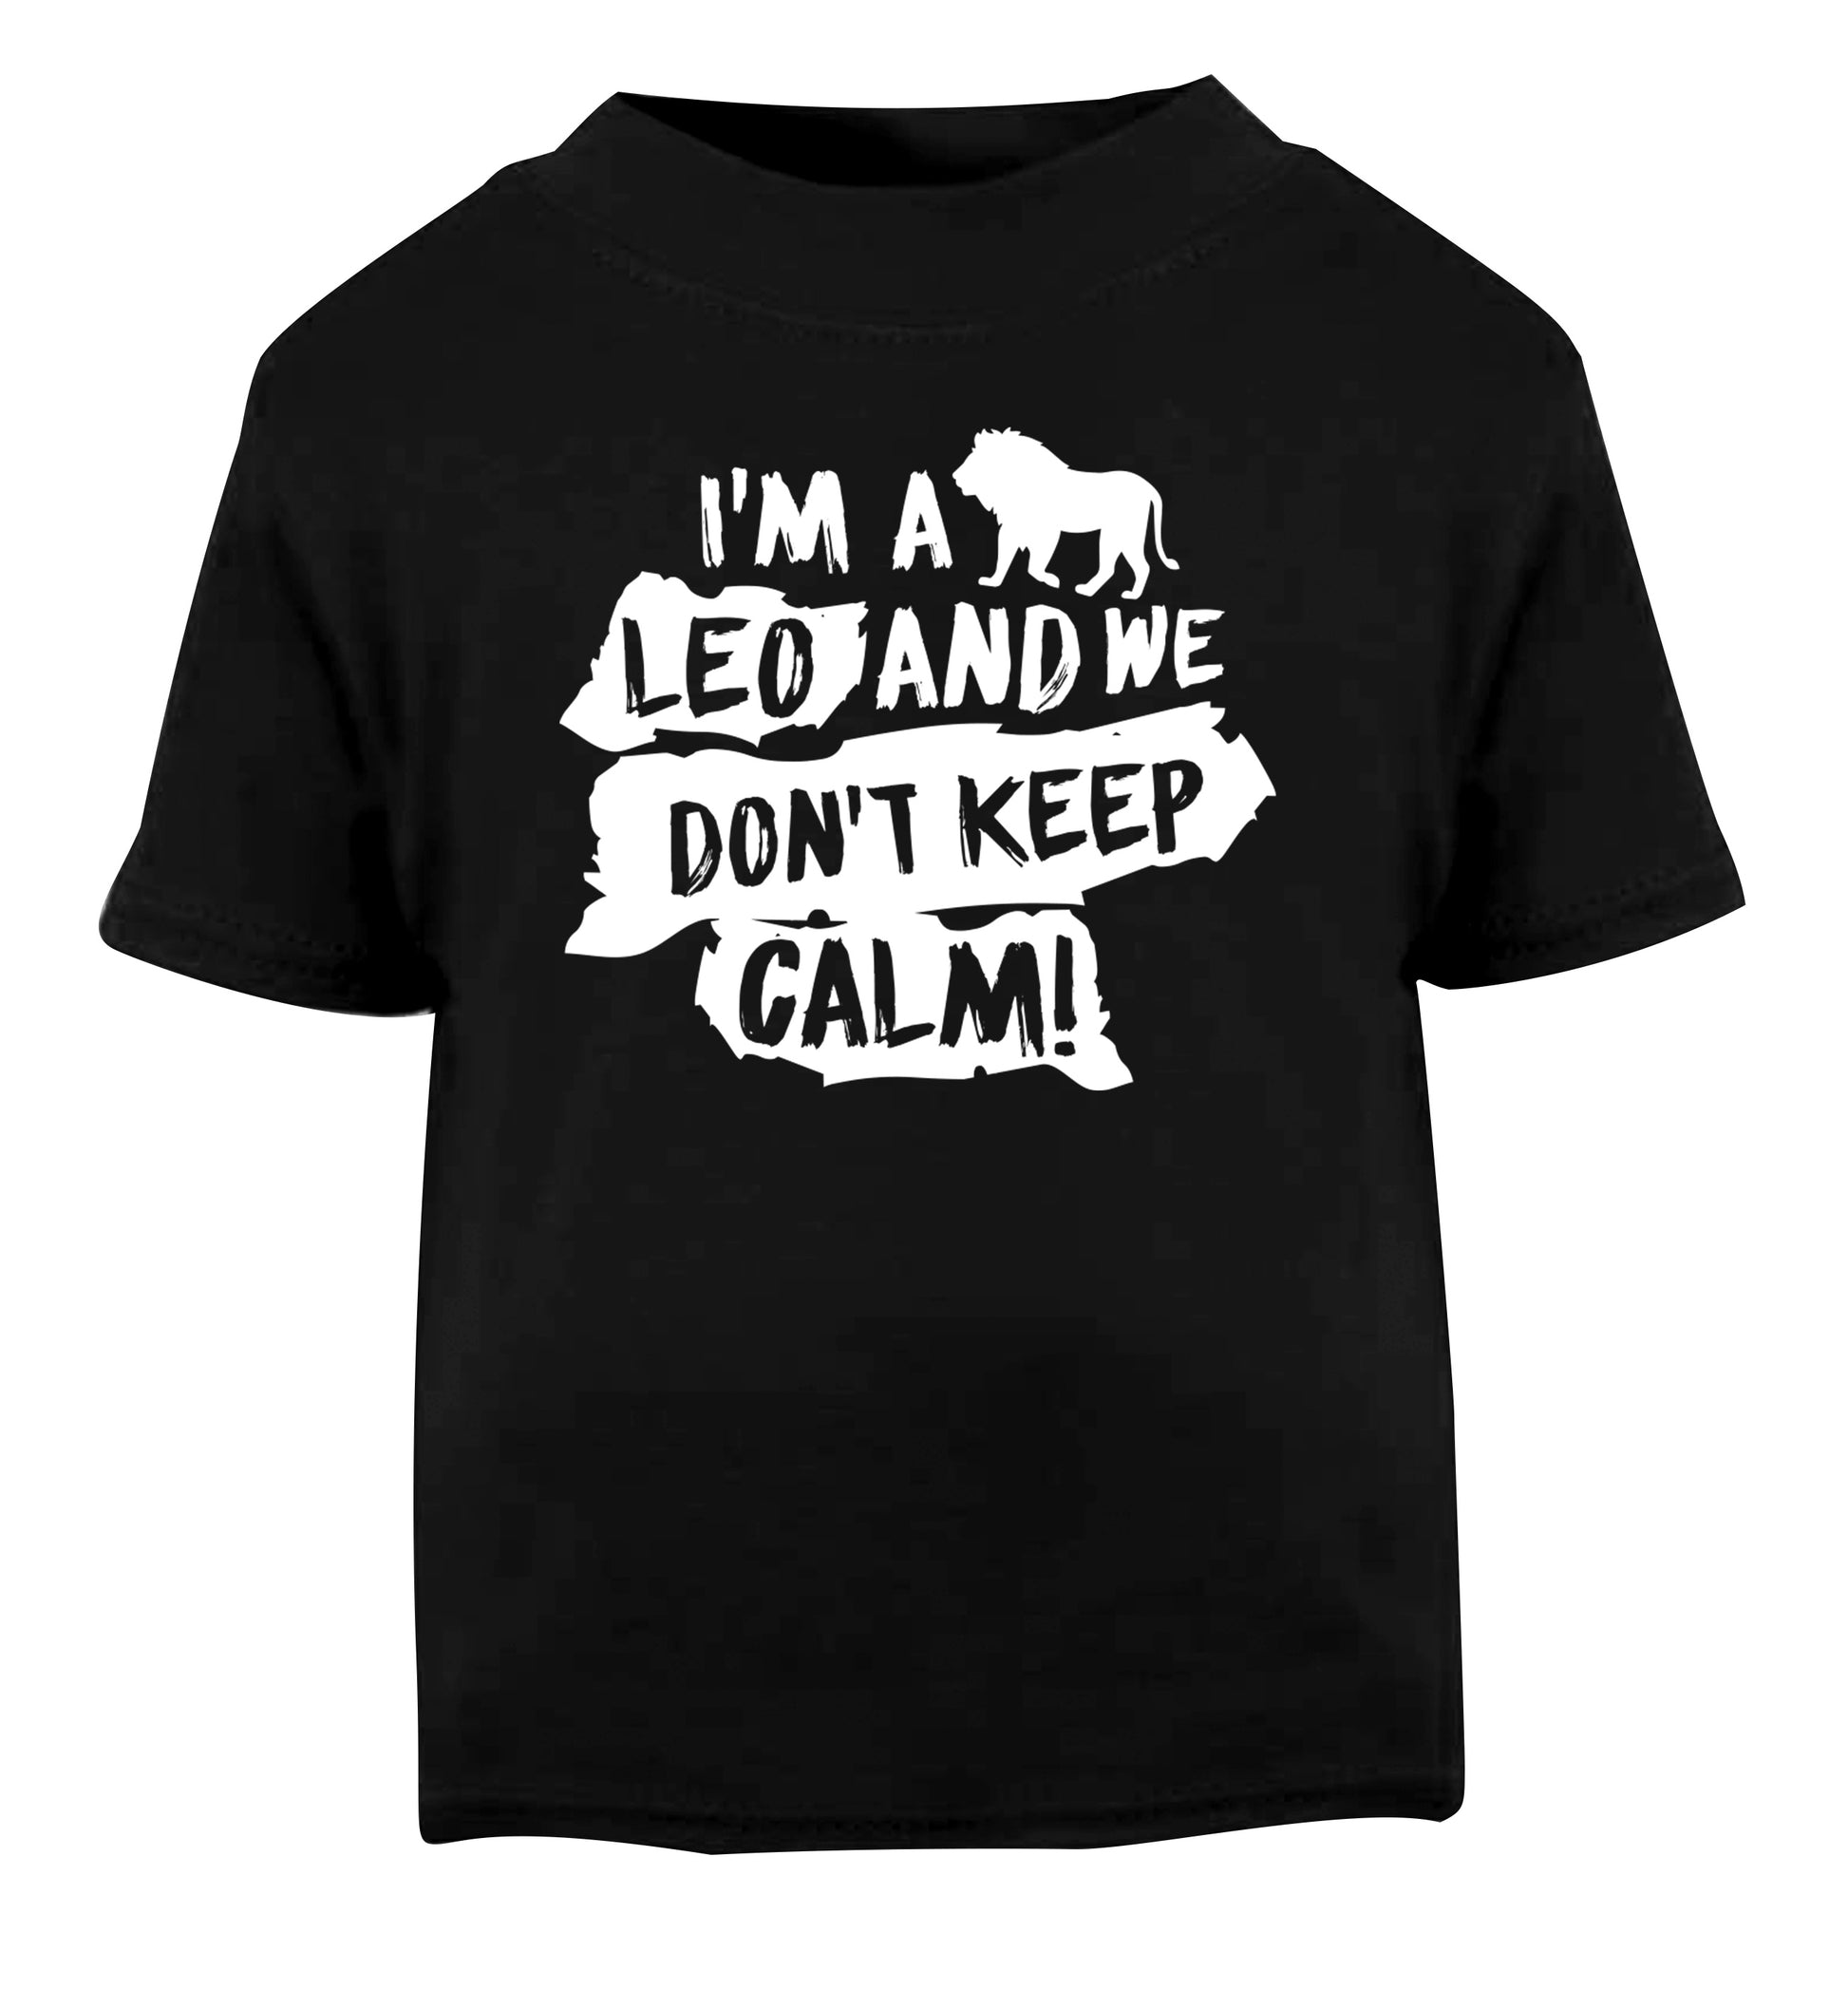 I'm a leo and we don't keep calm! Black Baby Toddler Tshirt 2 years